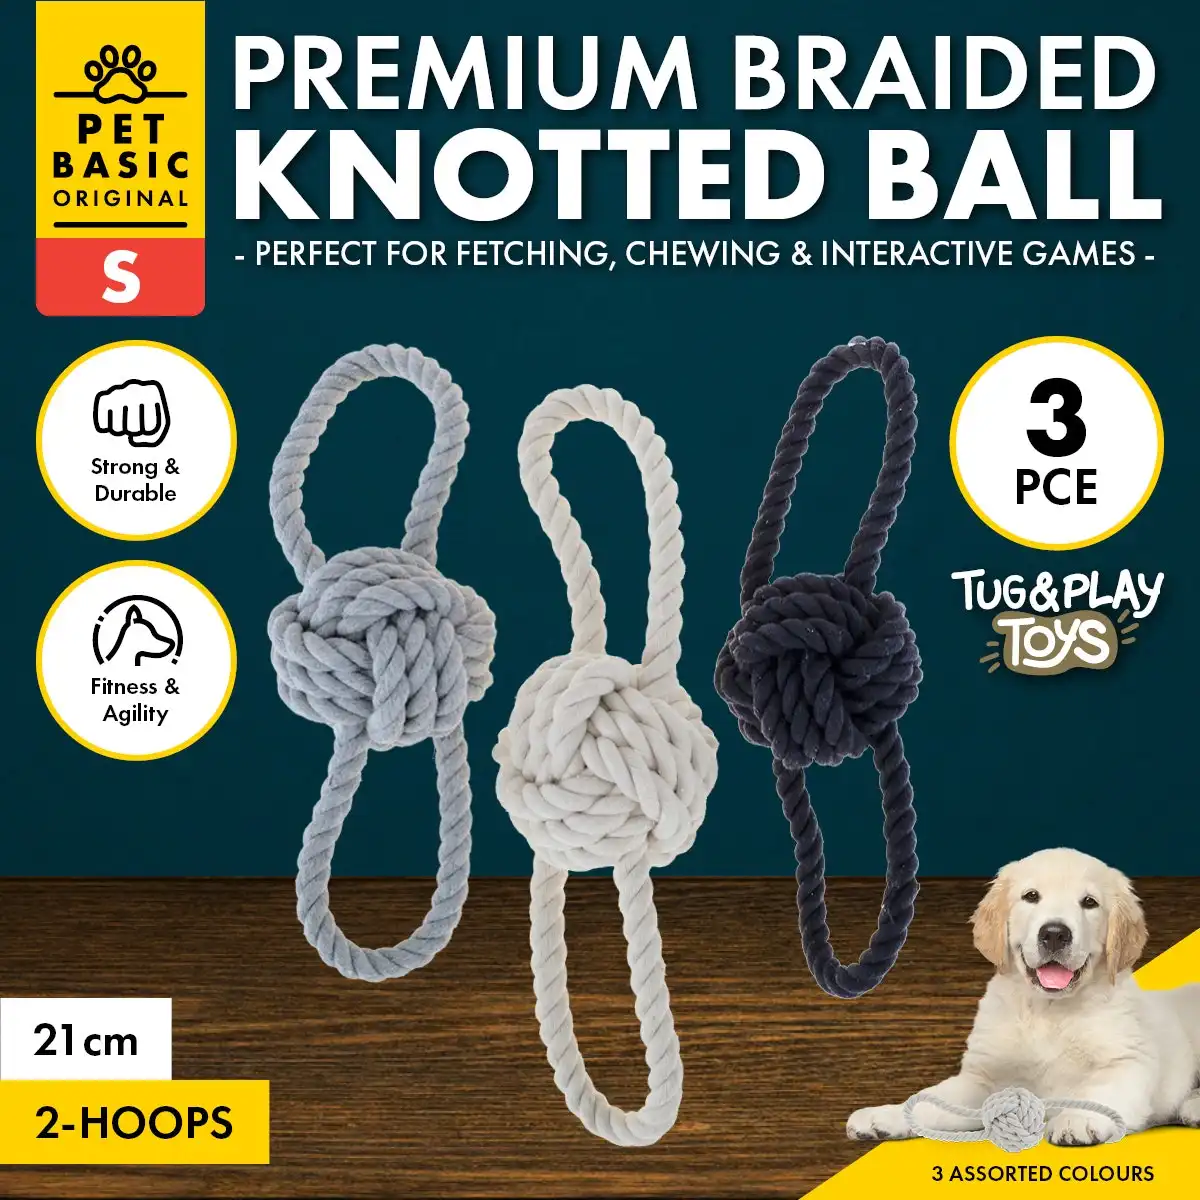 Pet Basic® 3PCE Premium Braided Rope Knotted Ball & Loops Natural Fibres 21cm